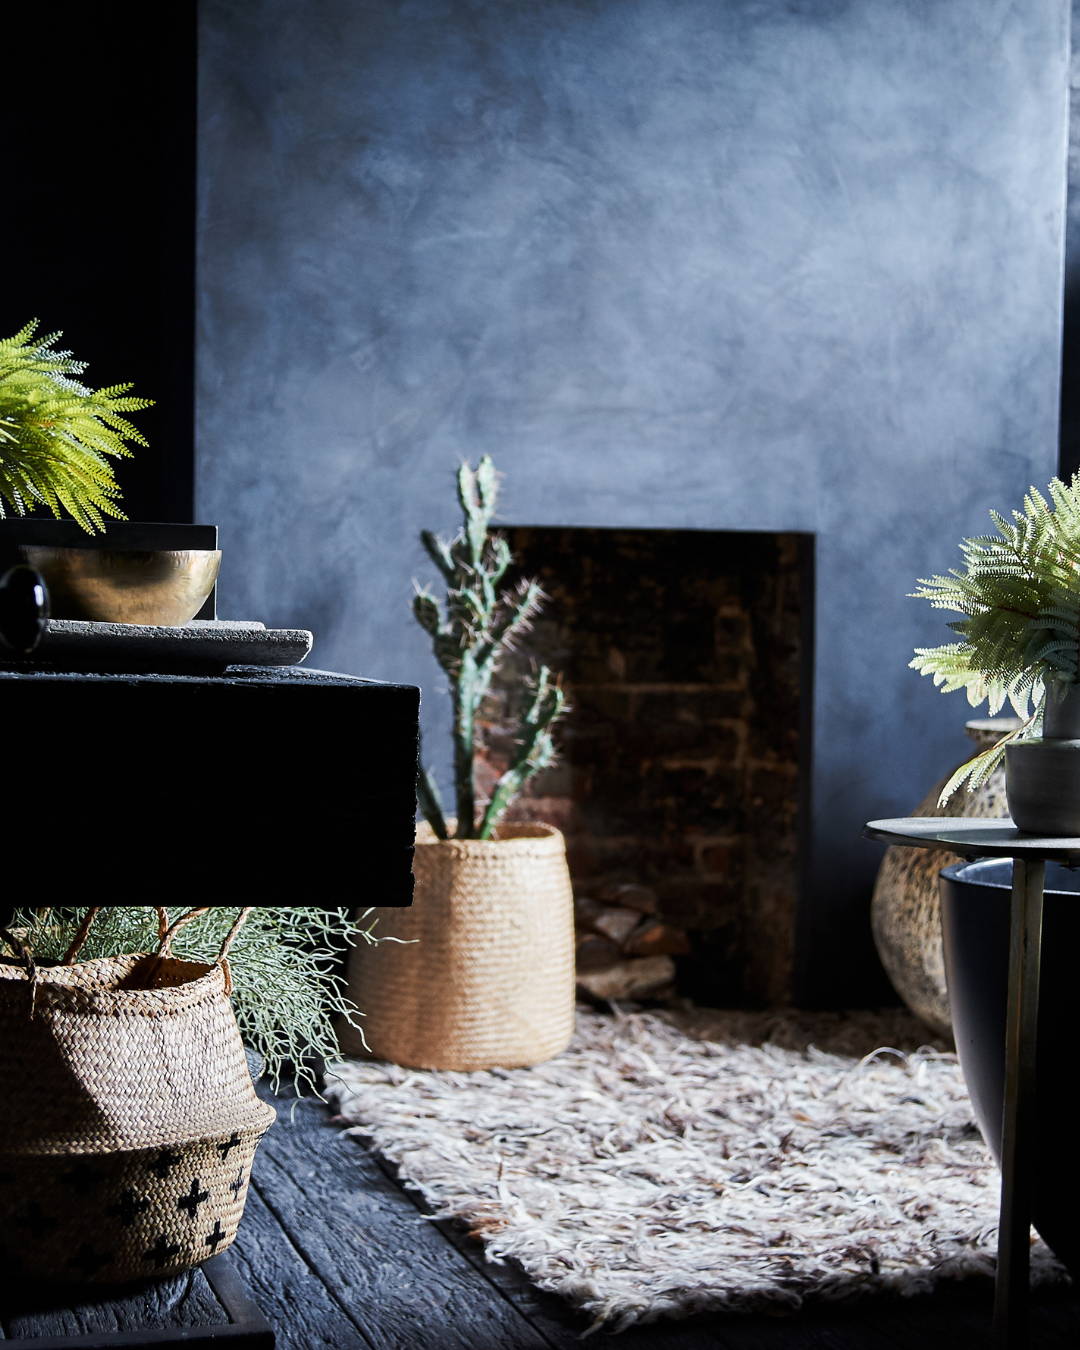 A dark bathroom with tadelakt walls, artificial plants in baskets and a shaggy wool rug